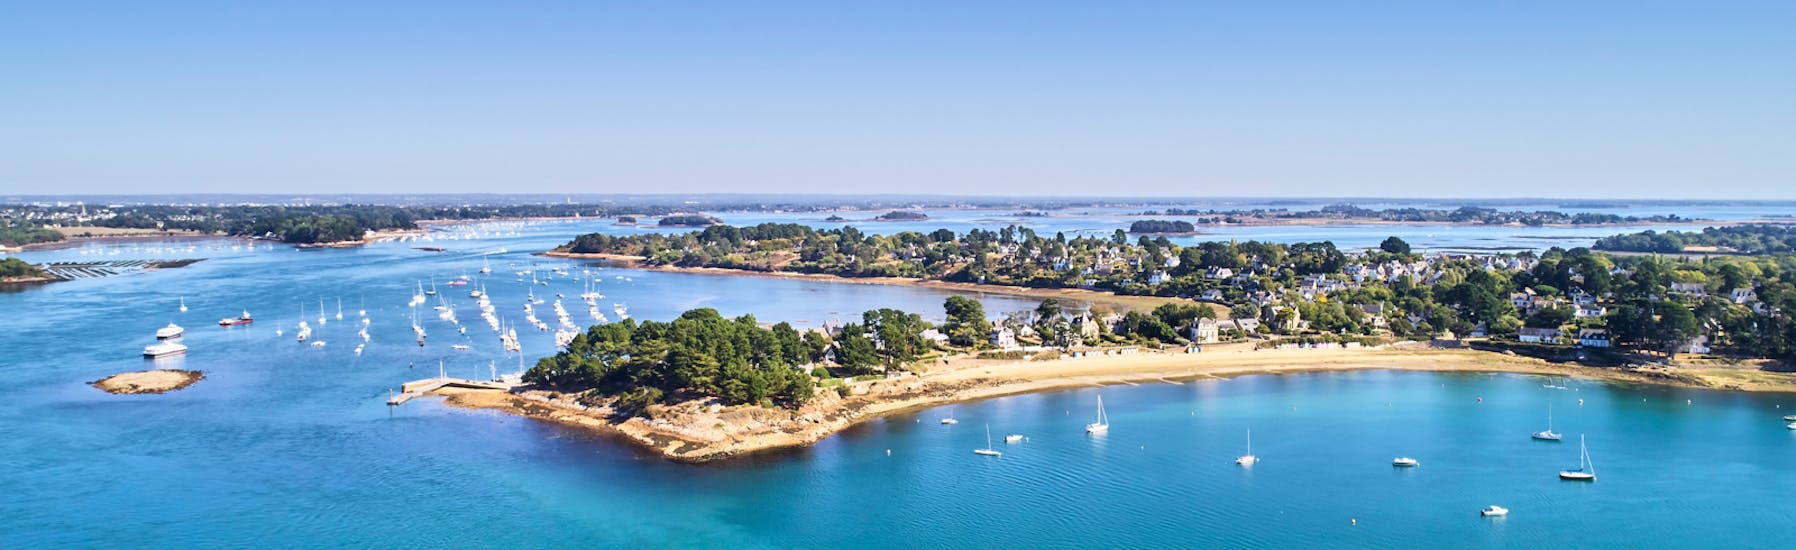 View of the Île aux Moines from above during a Boat Trip in the Gulf of Morbihan & Stop on Île aux Moines for Families from Izenah Croisières Morbihan.